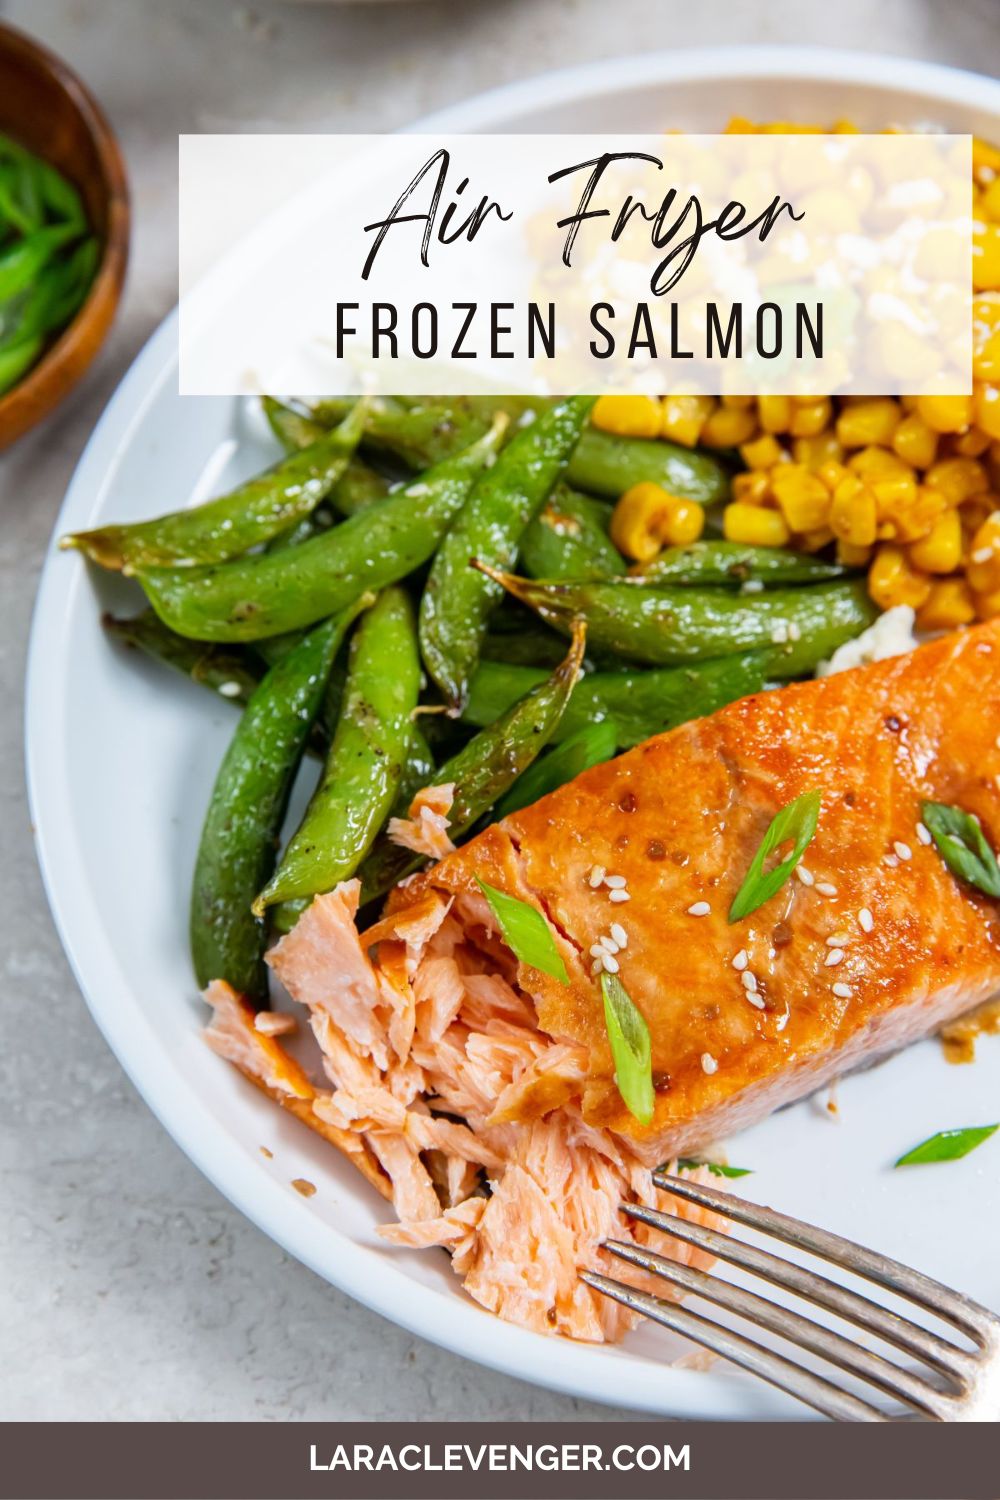 pin of air fryer frozen salmon on a white plate